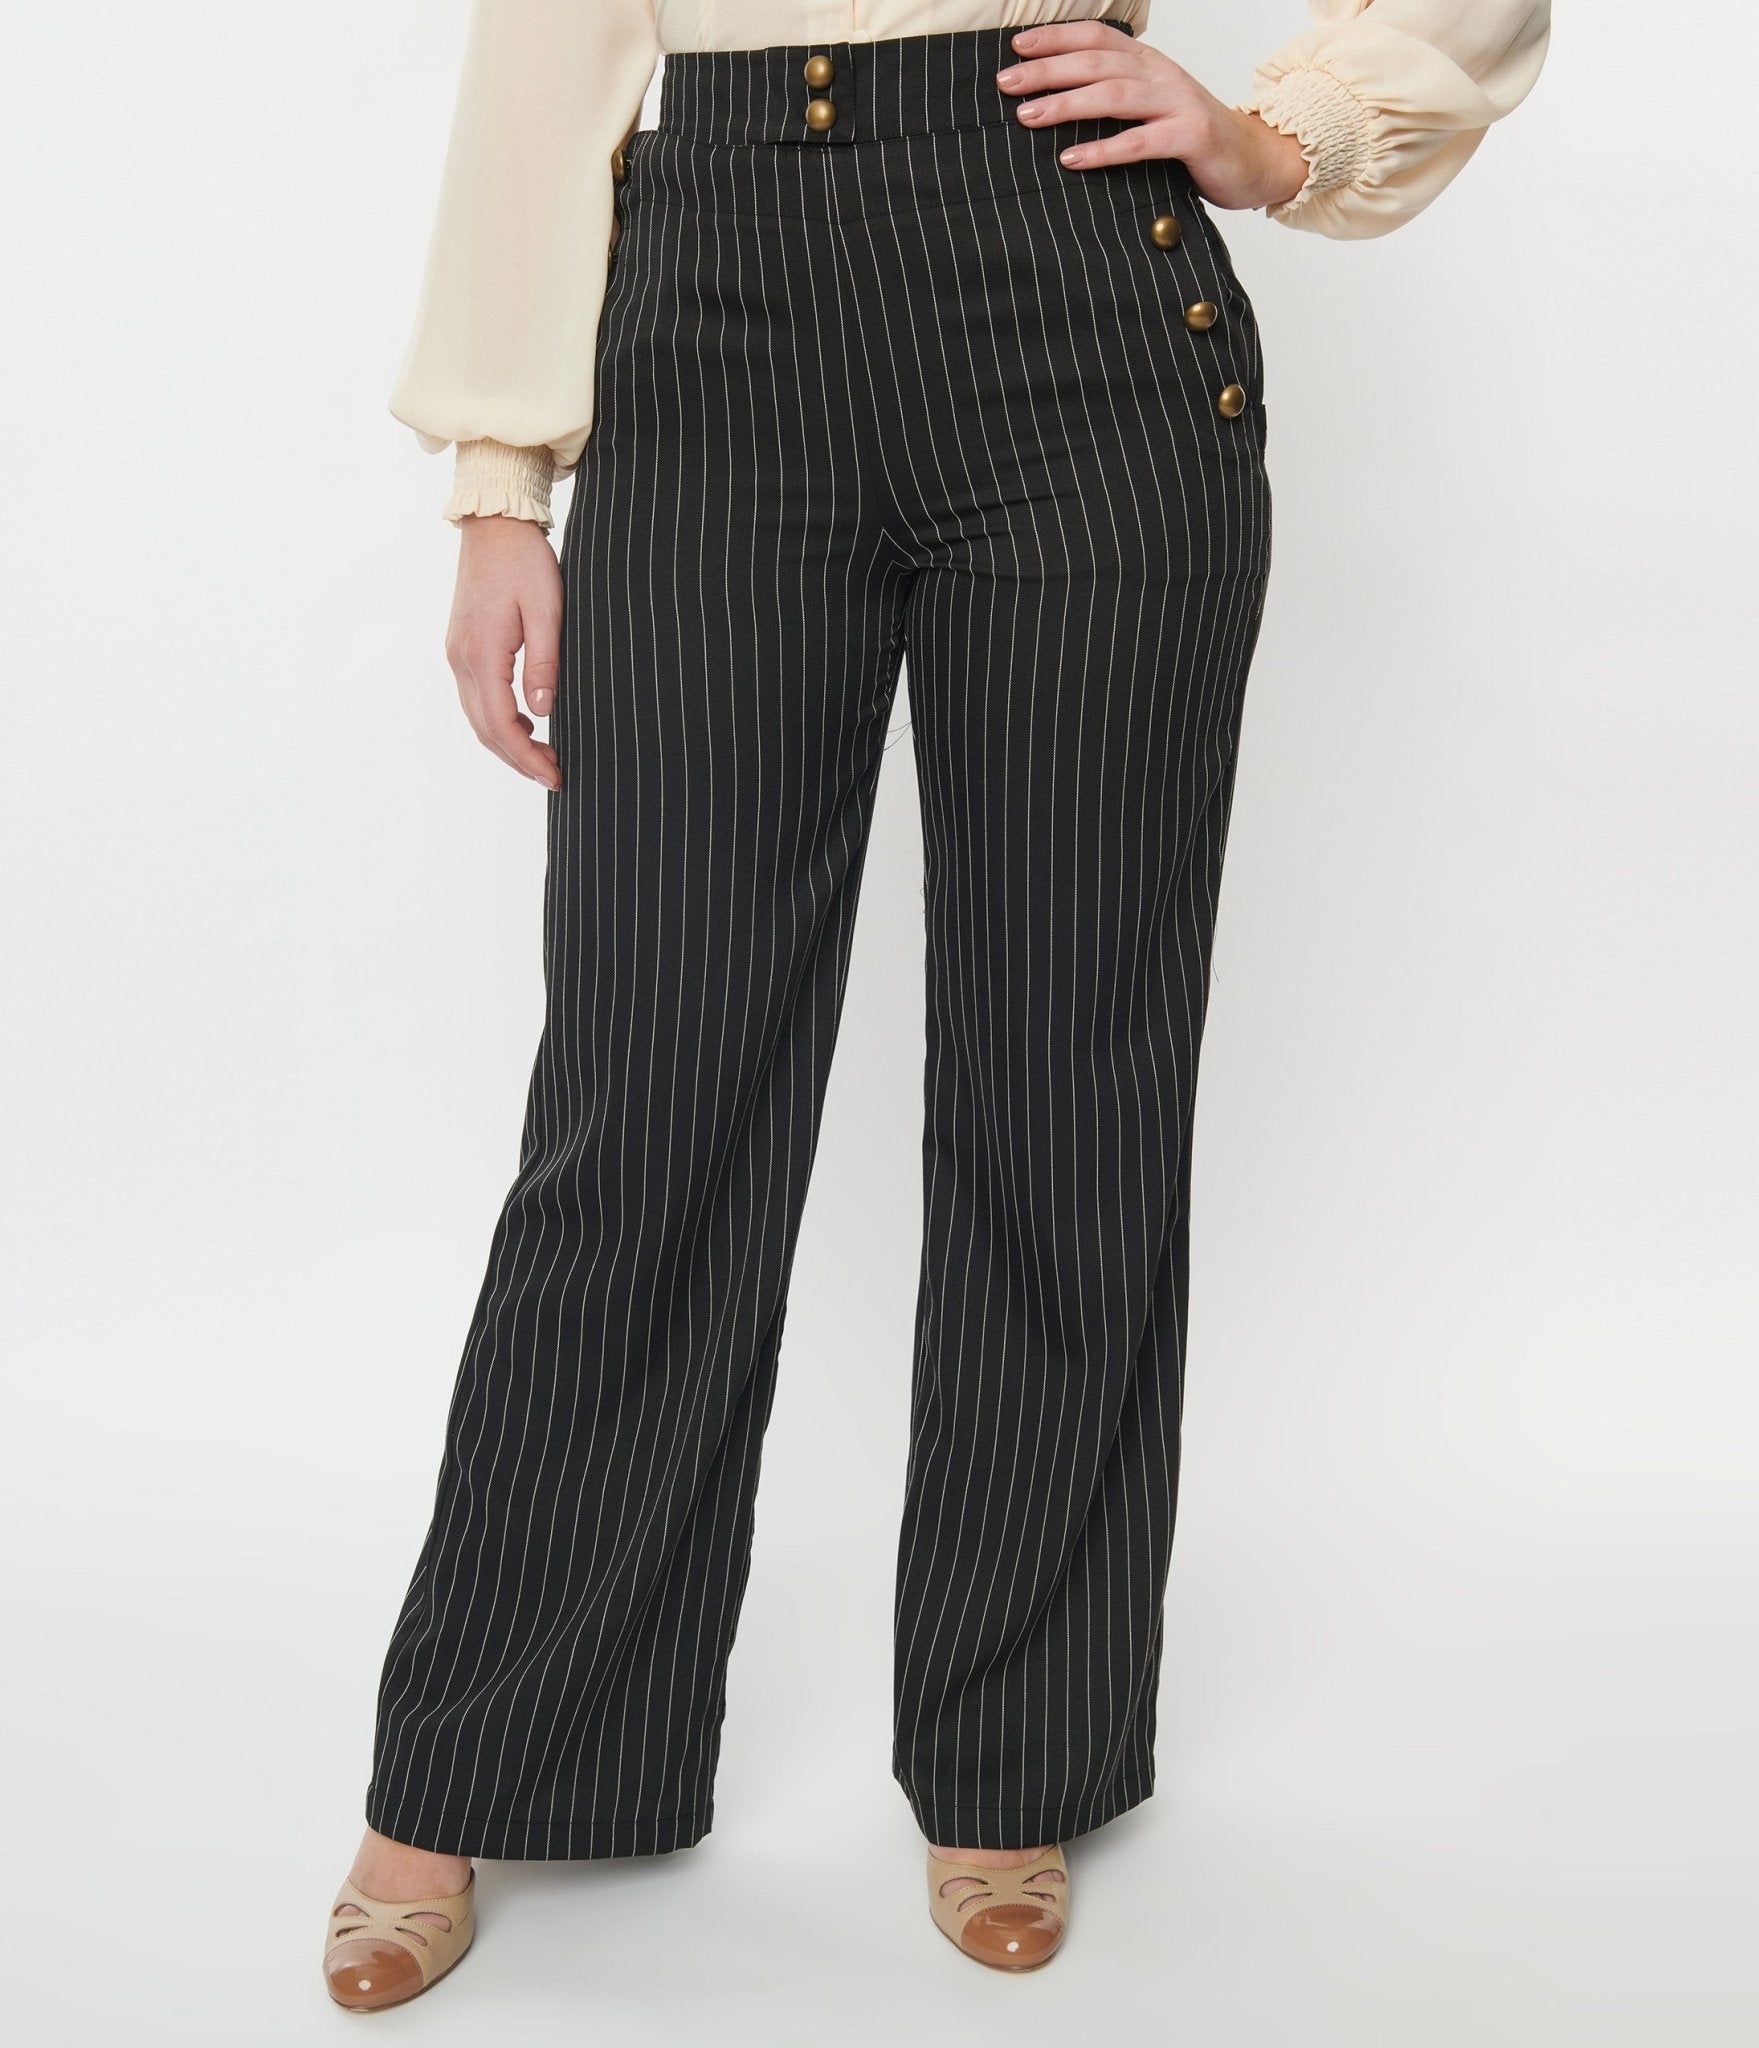 Pinstripe Pants for Women - Up to 80% off